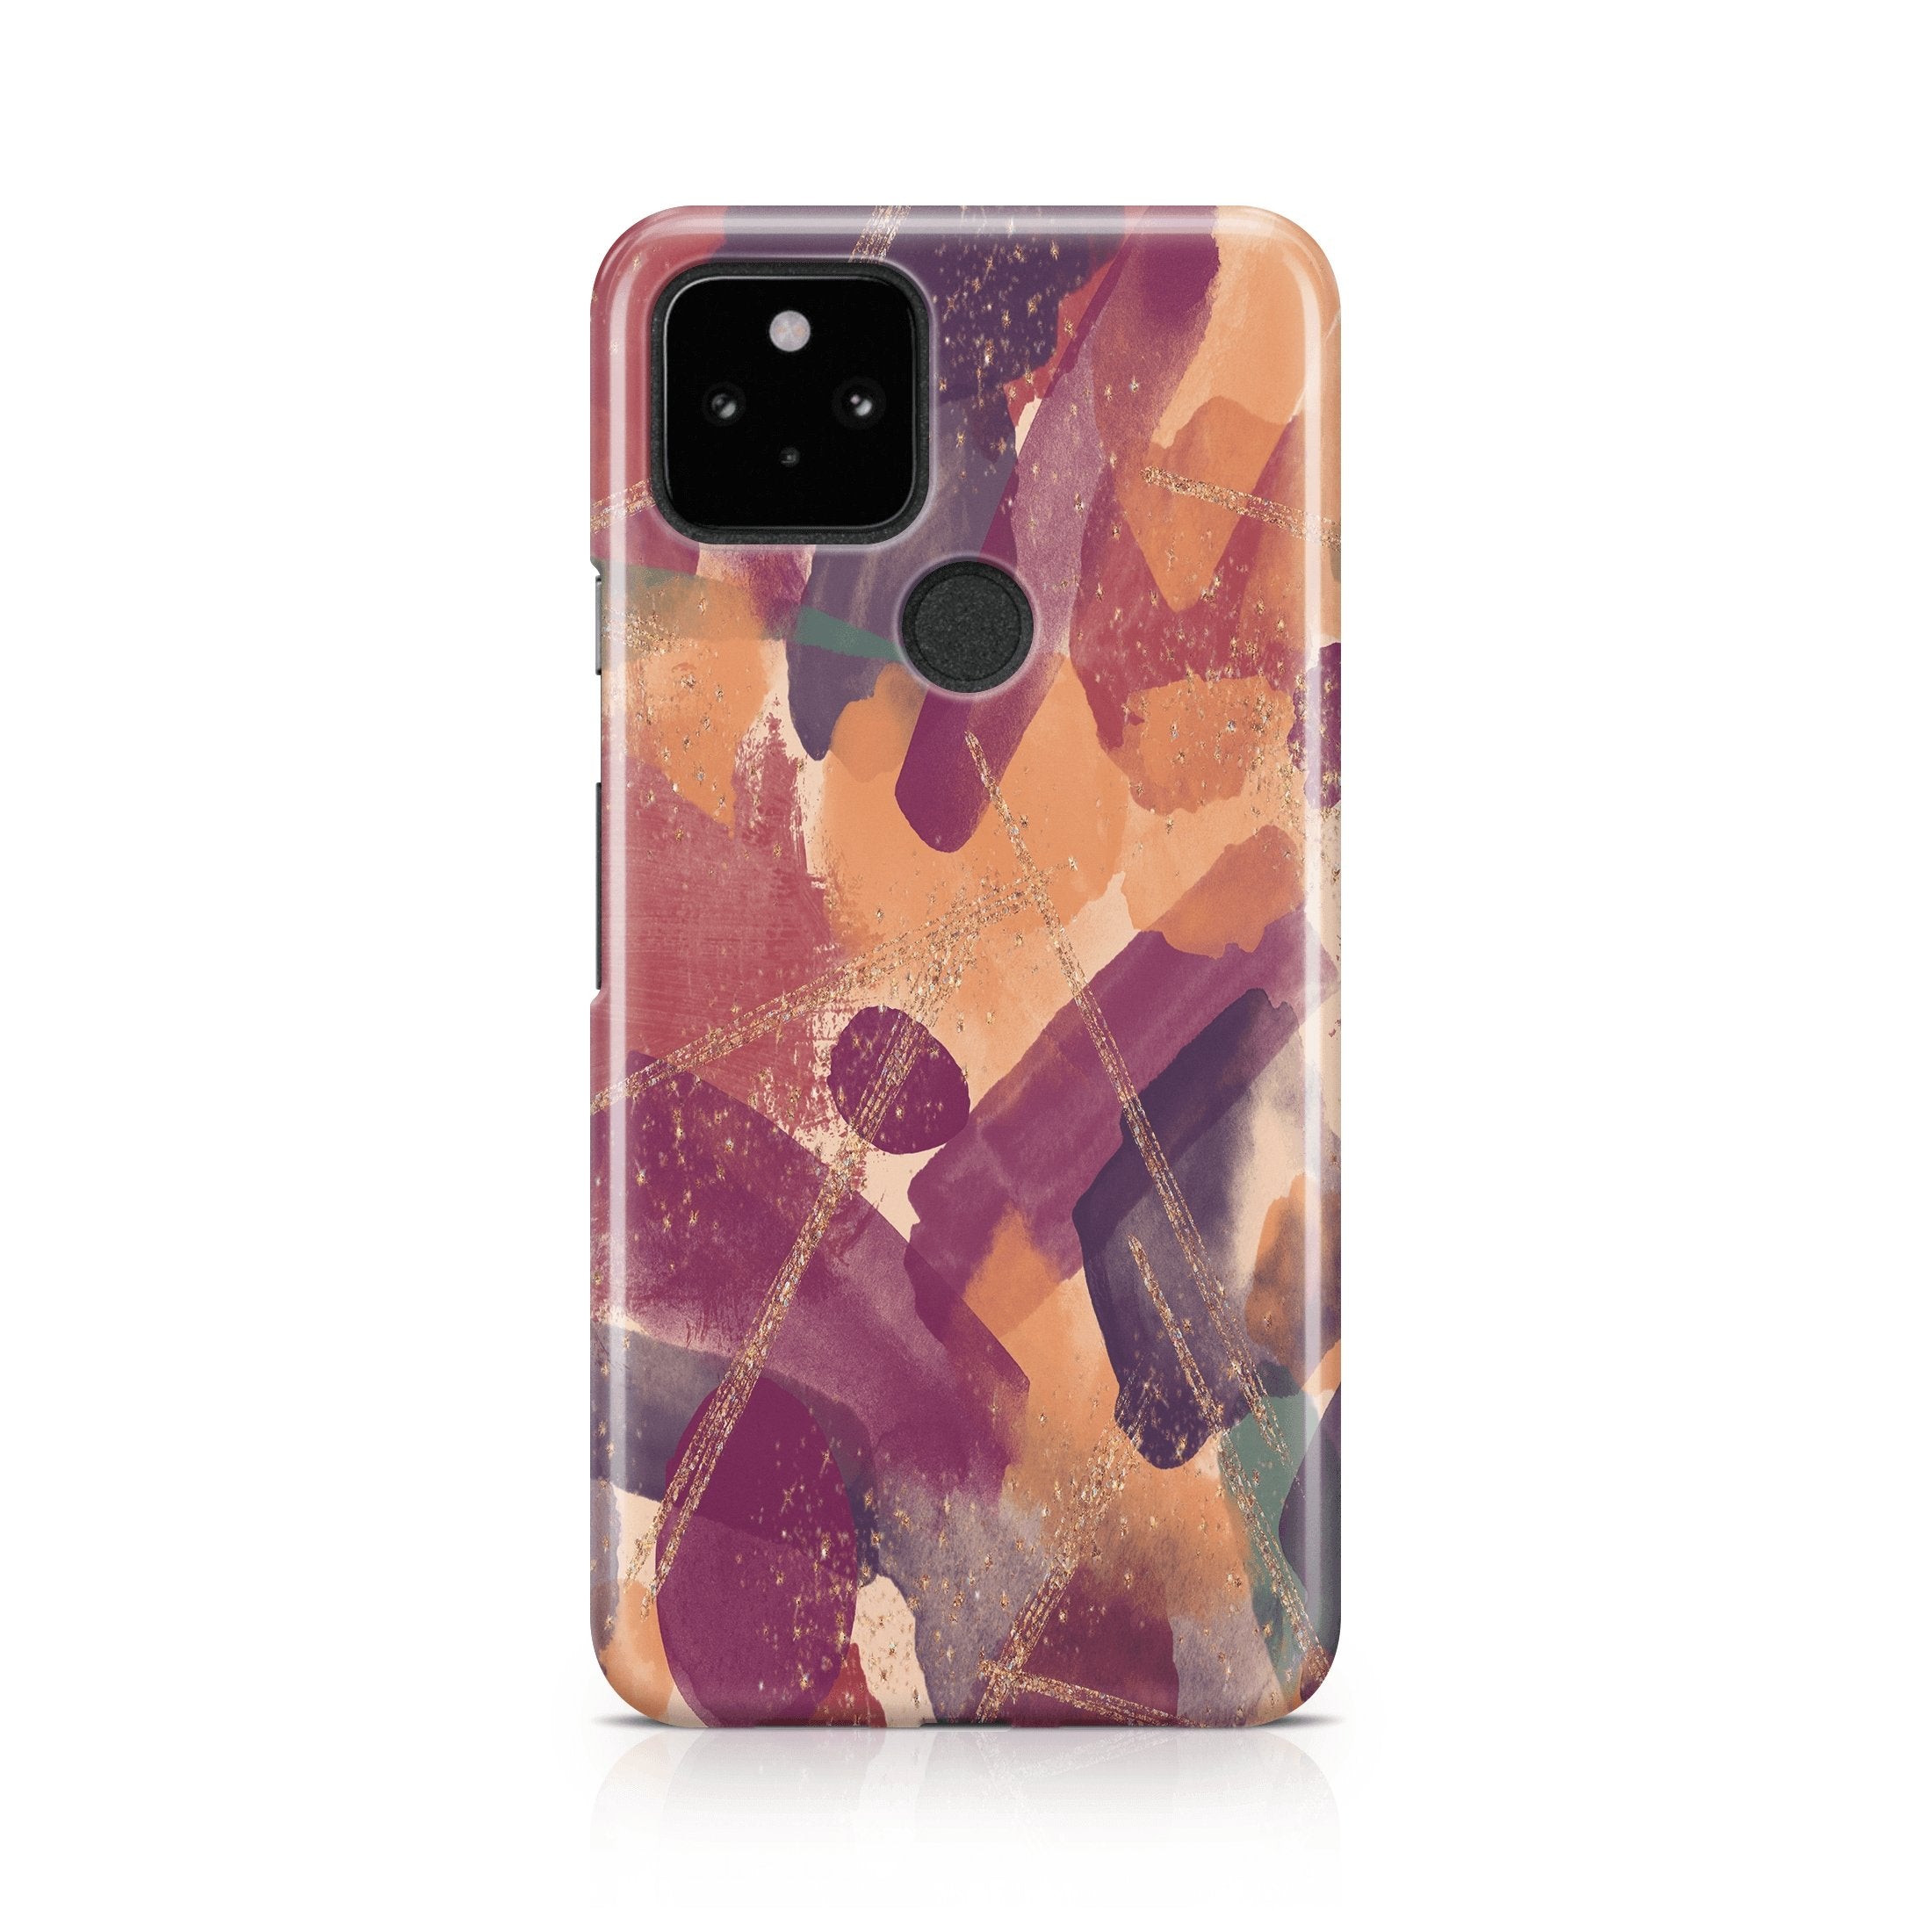 Fall Colors - Google phone case designs by CaseSwagger